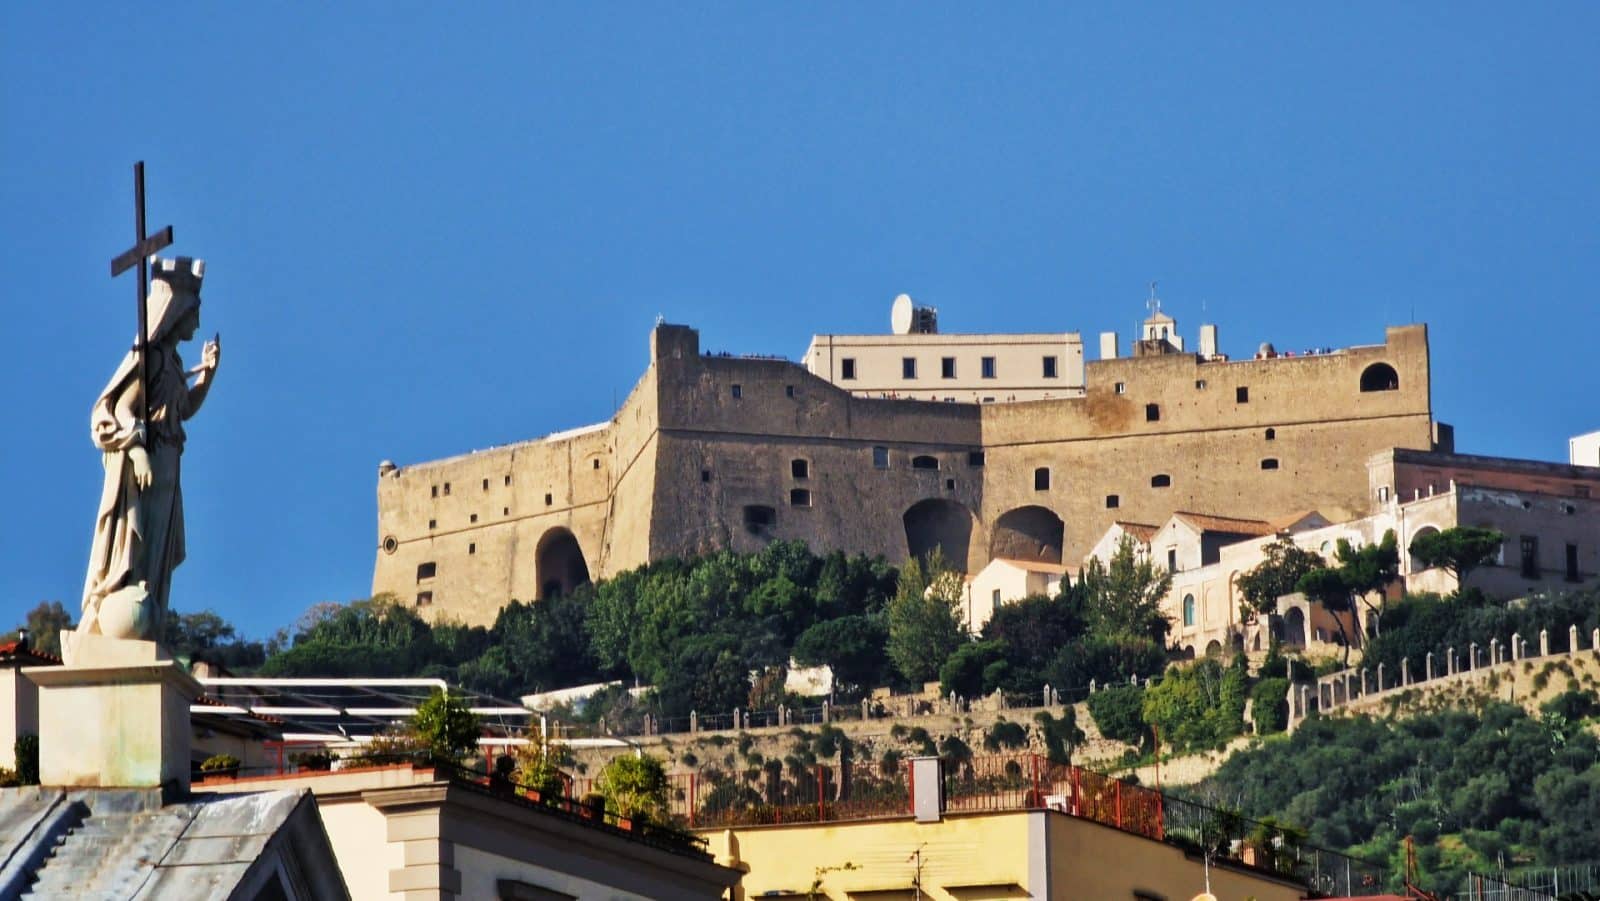 The Ultimate Guide to Visiting Castel Sant'Elmo in Naples